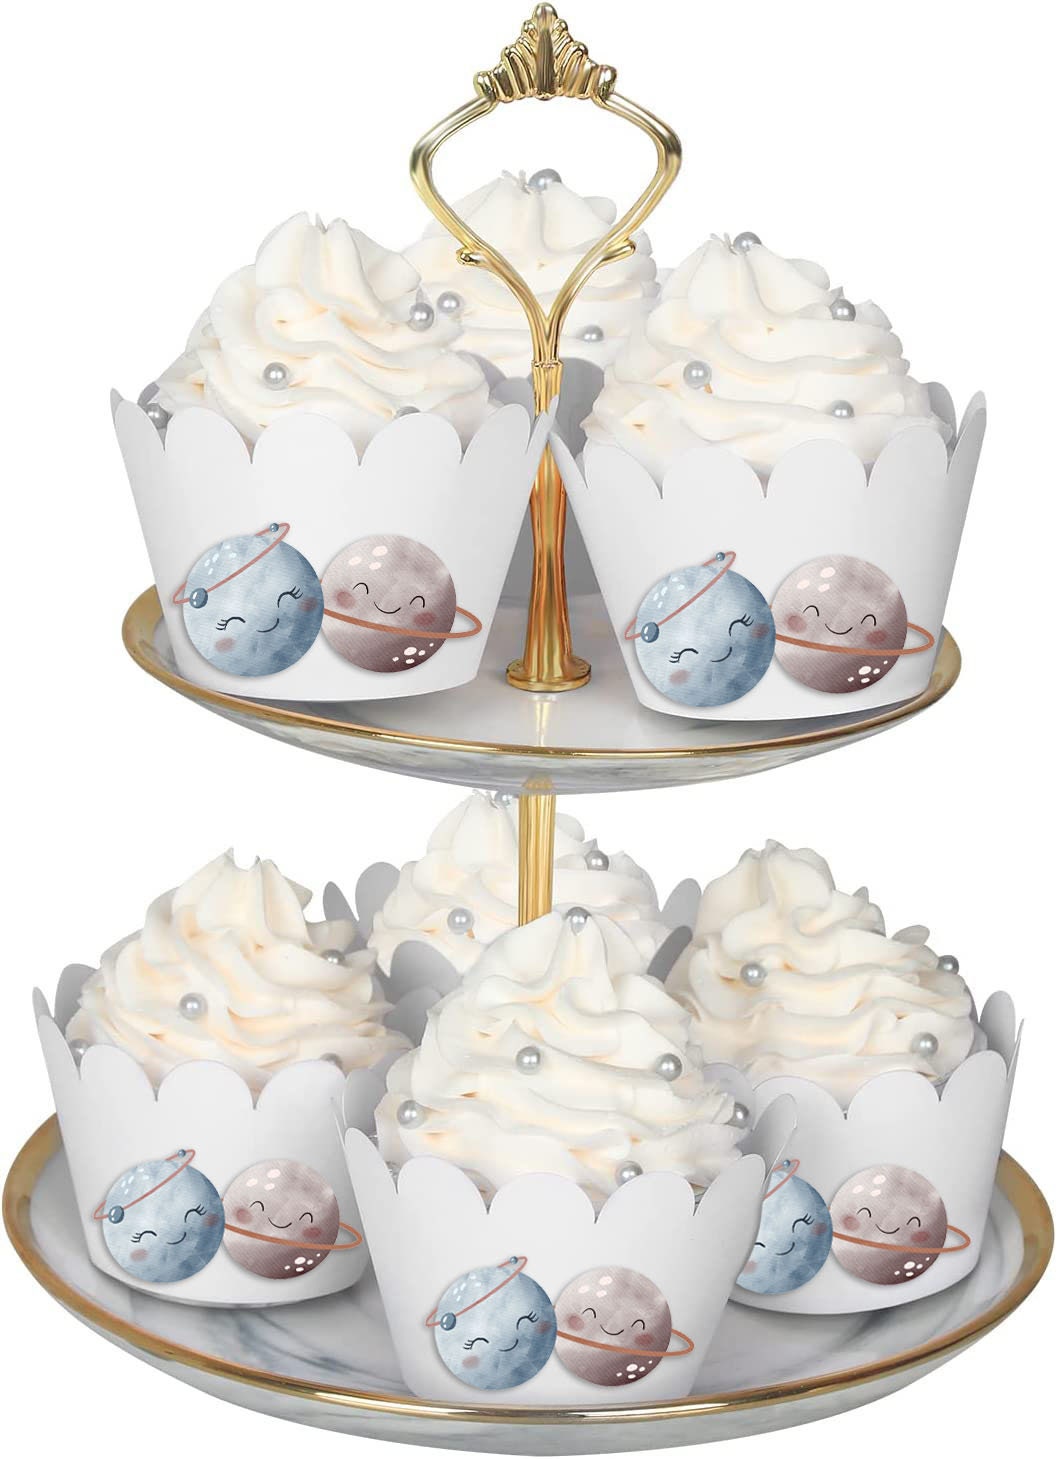 Space Planets Cupcake Wrappers - Set of 10, Perfect for Cosmic-Themed Parties & Events!